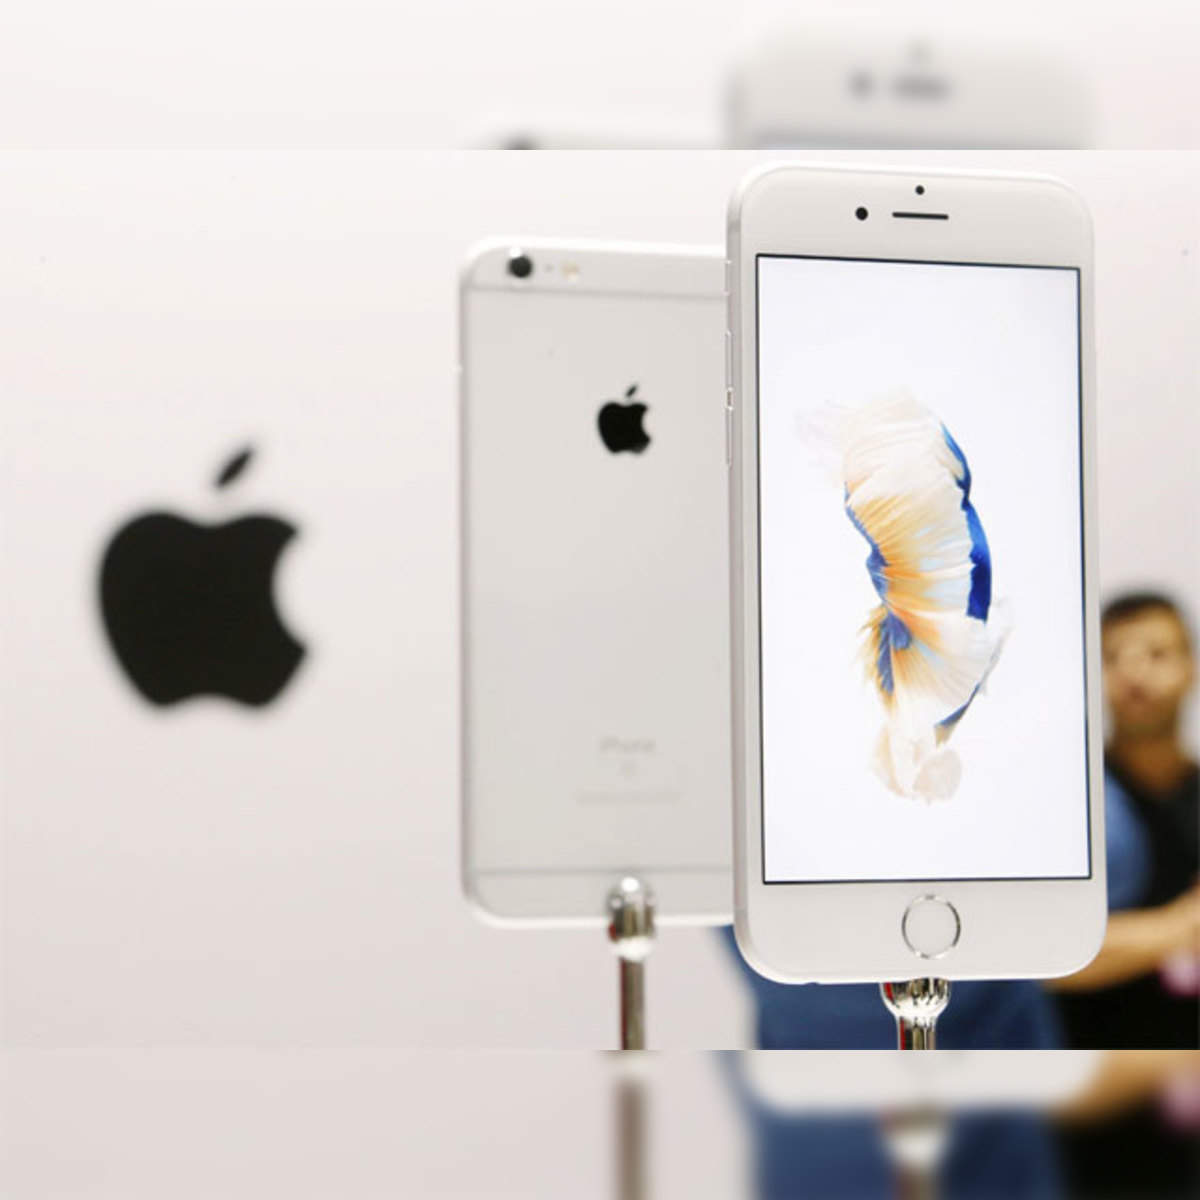 Apple kicks off iPhone 6s sales in India, demand remains lukewarm